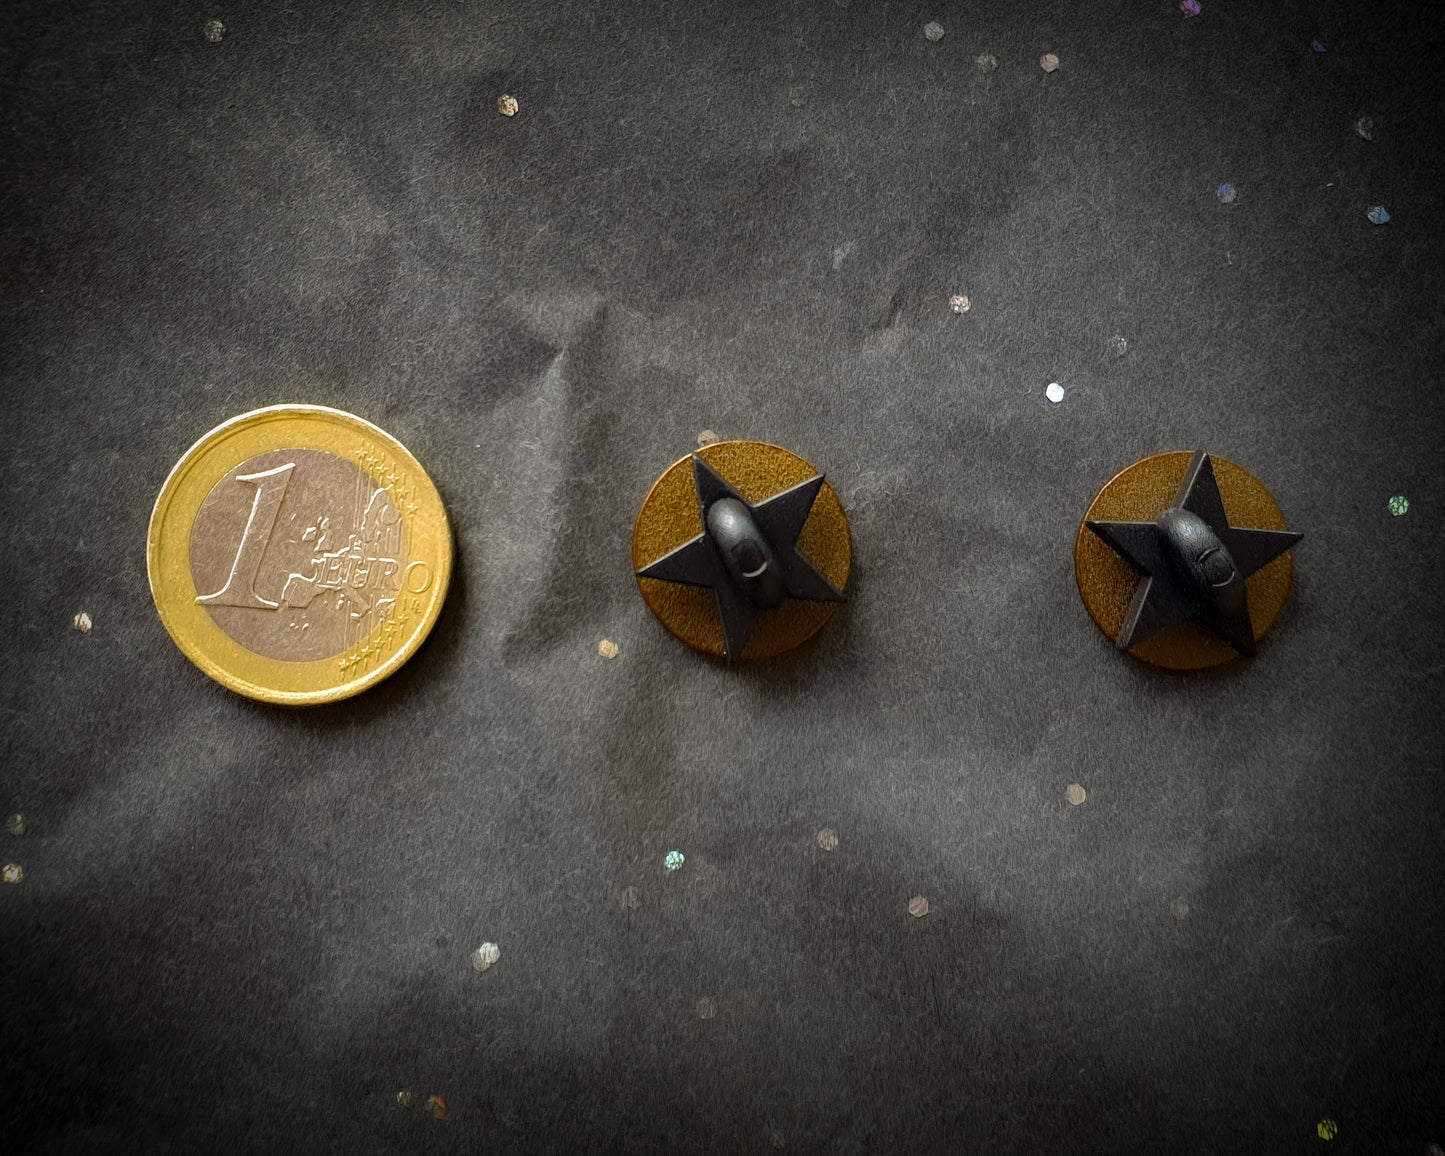 The Dawn - Mini Pin Set - Star-crossed Lovers (Collaboration by Astermorn and Annadrawsstuff)